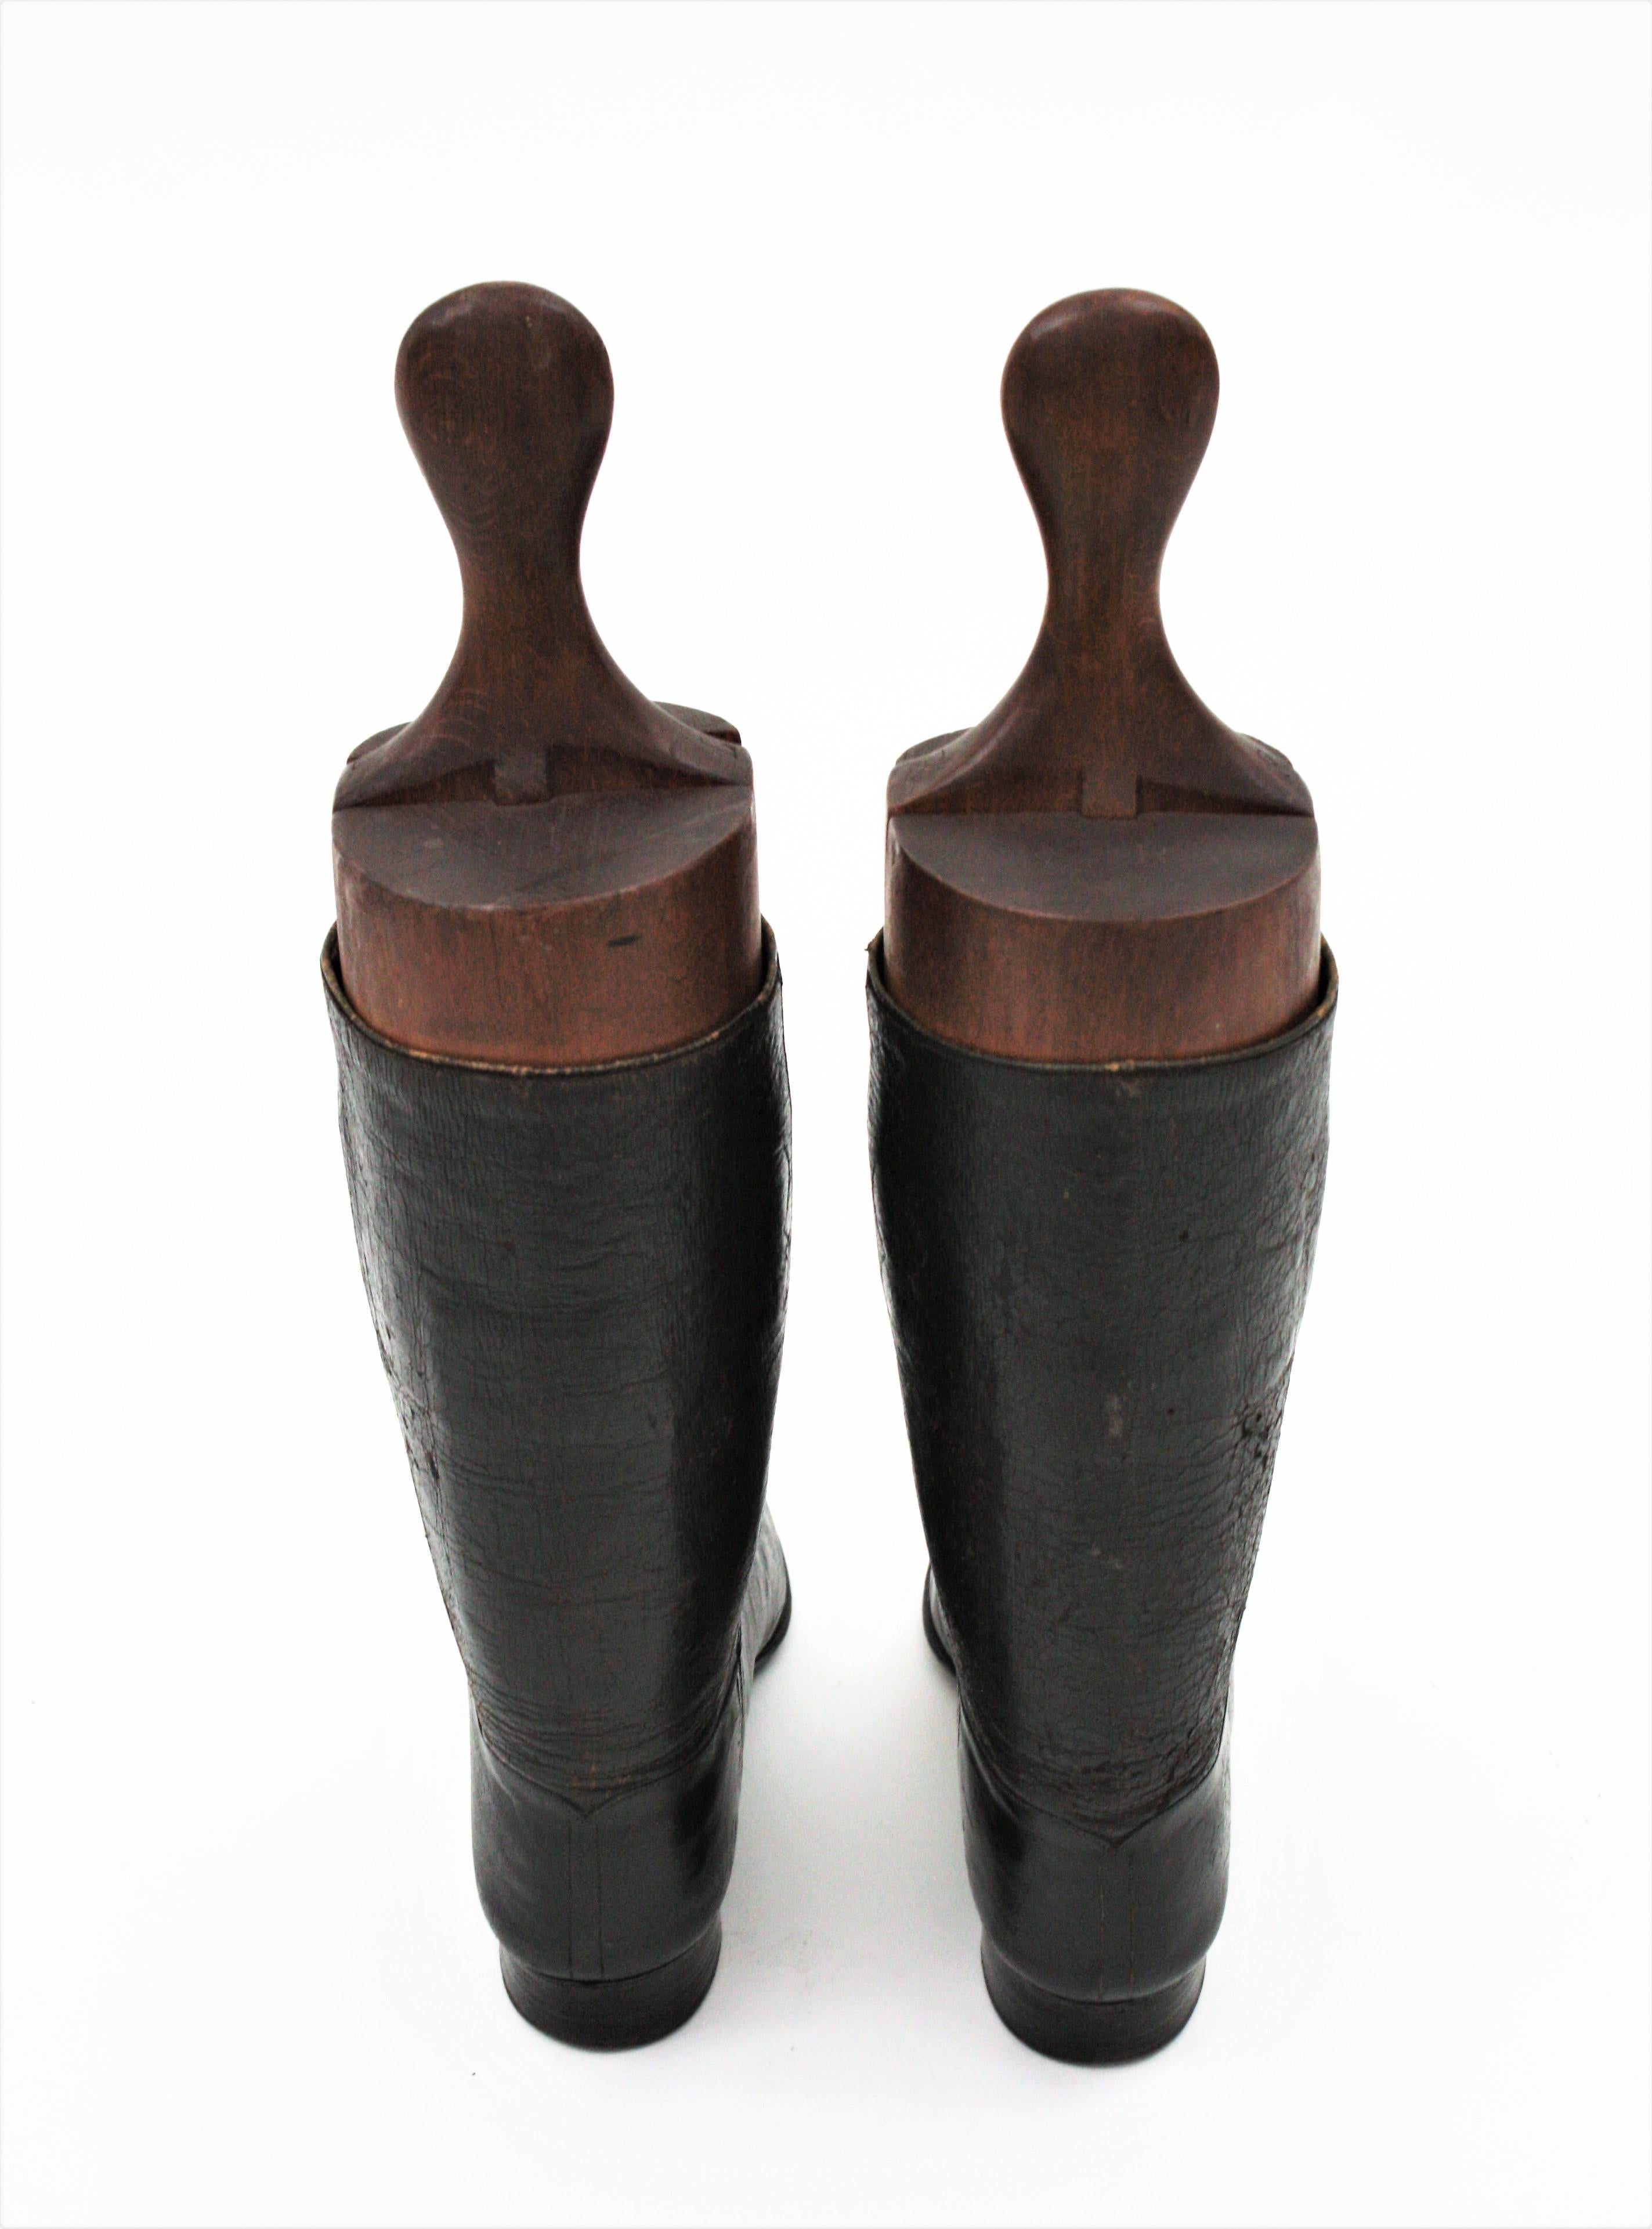 Pair of English Victorian Bespoke Leather Boots with Wood Trees For Sale 1